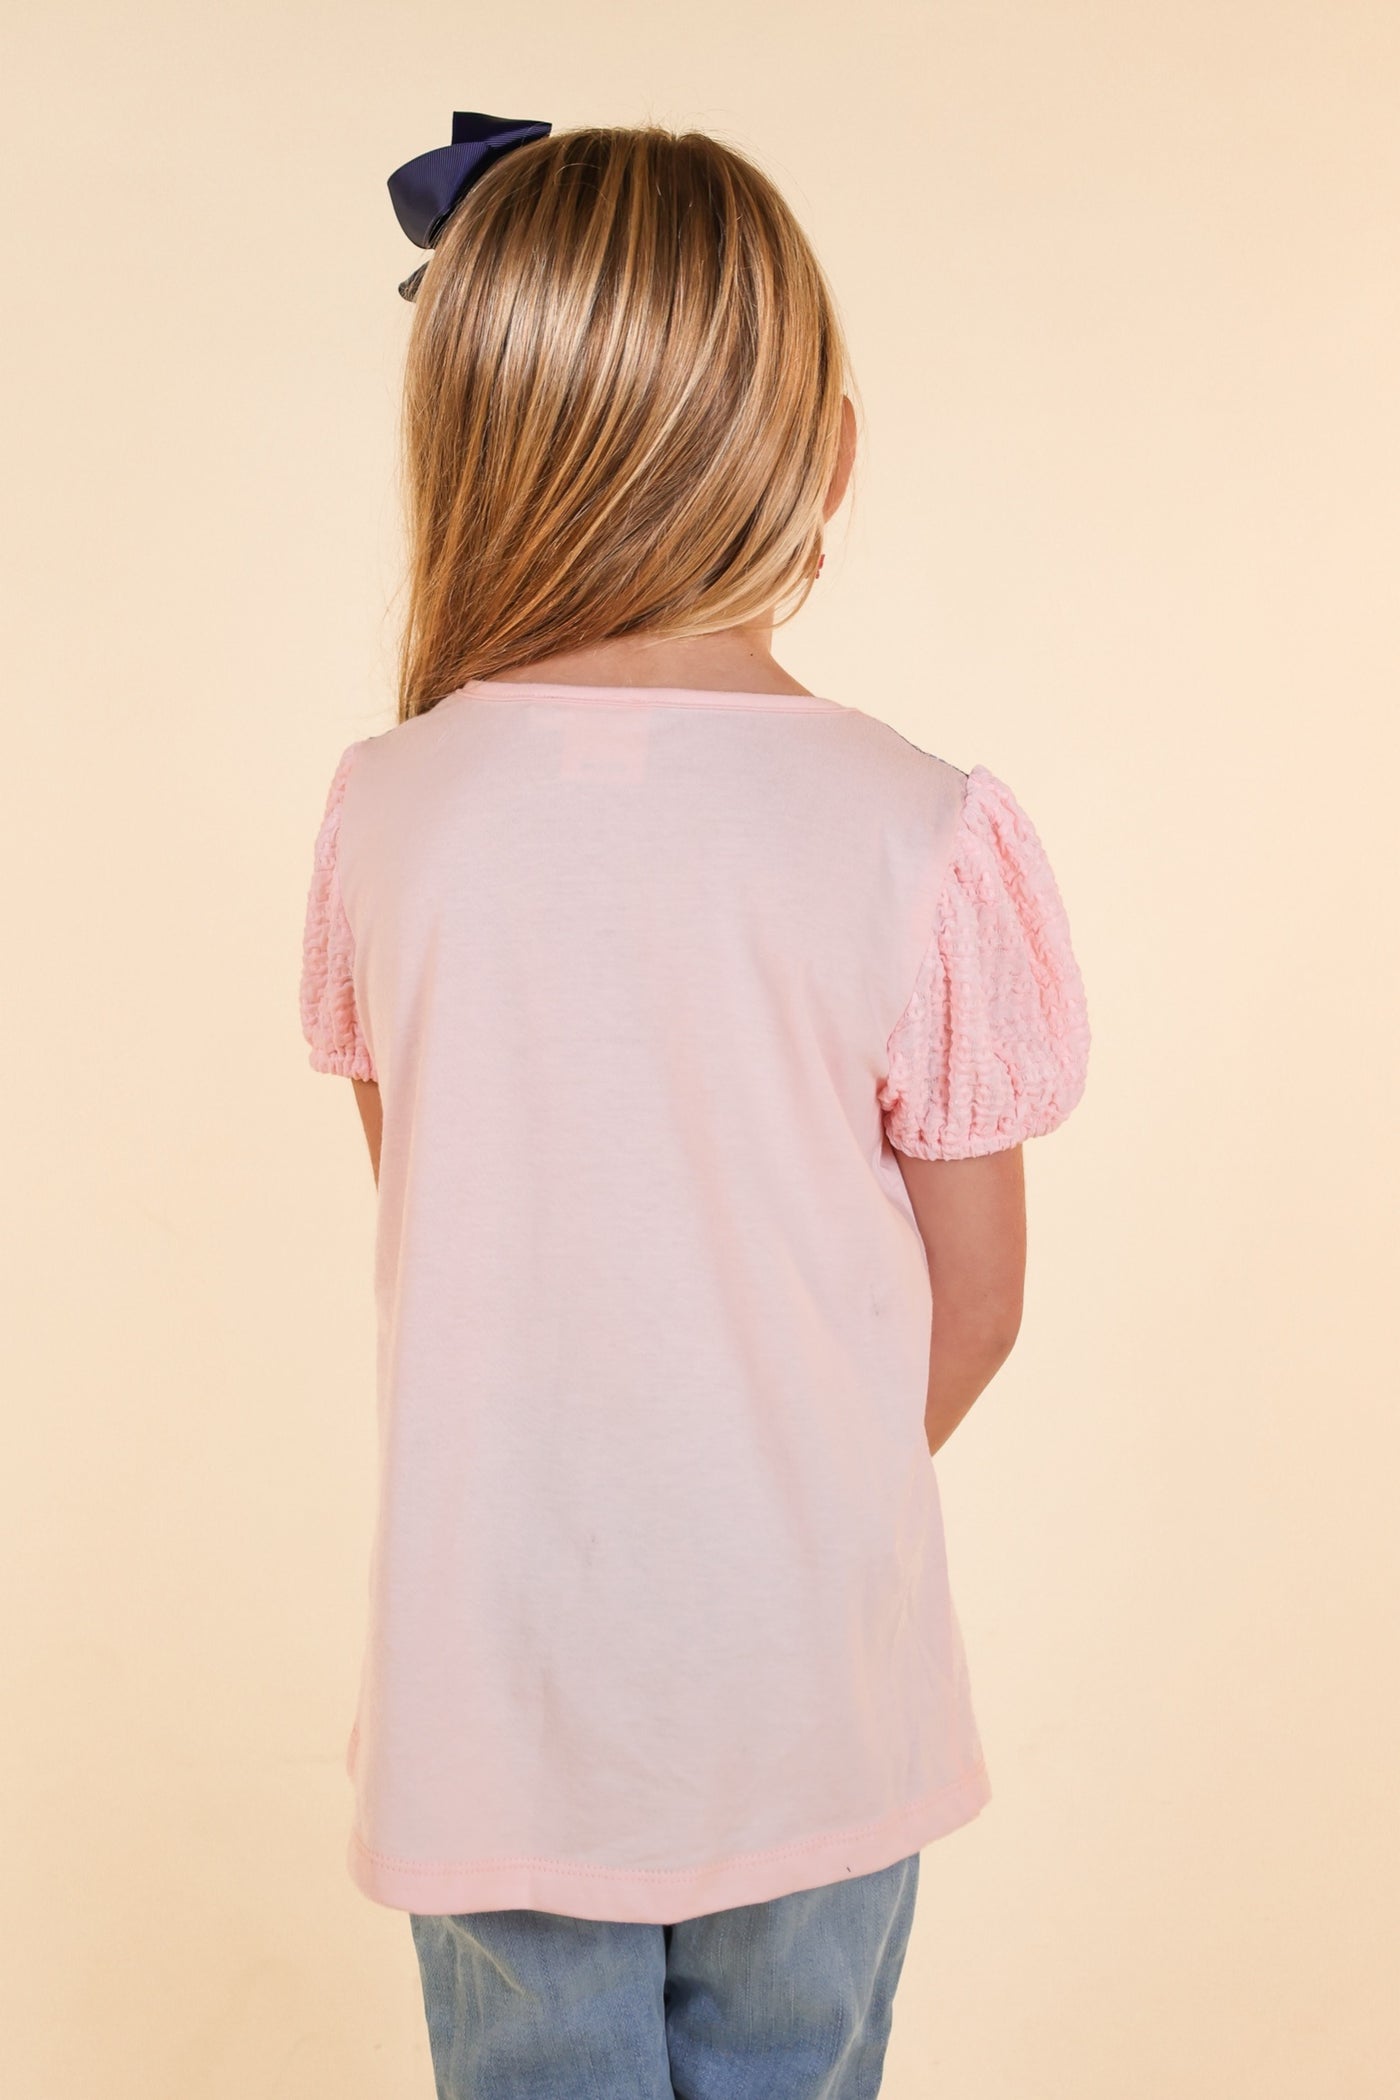 Girls Pink Top With Floral Lace and Puff Sleeve